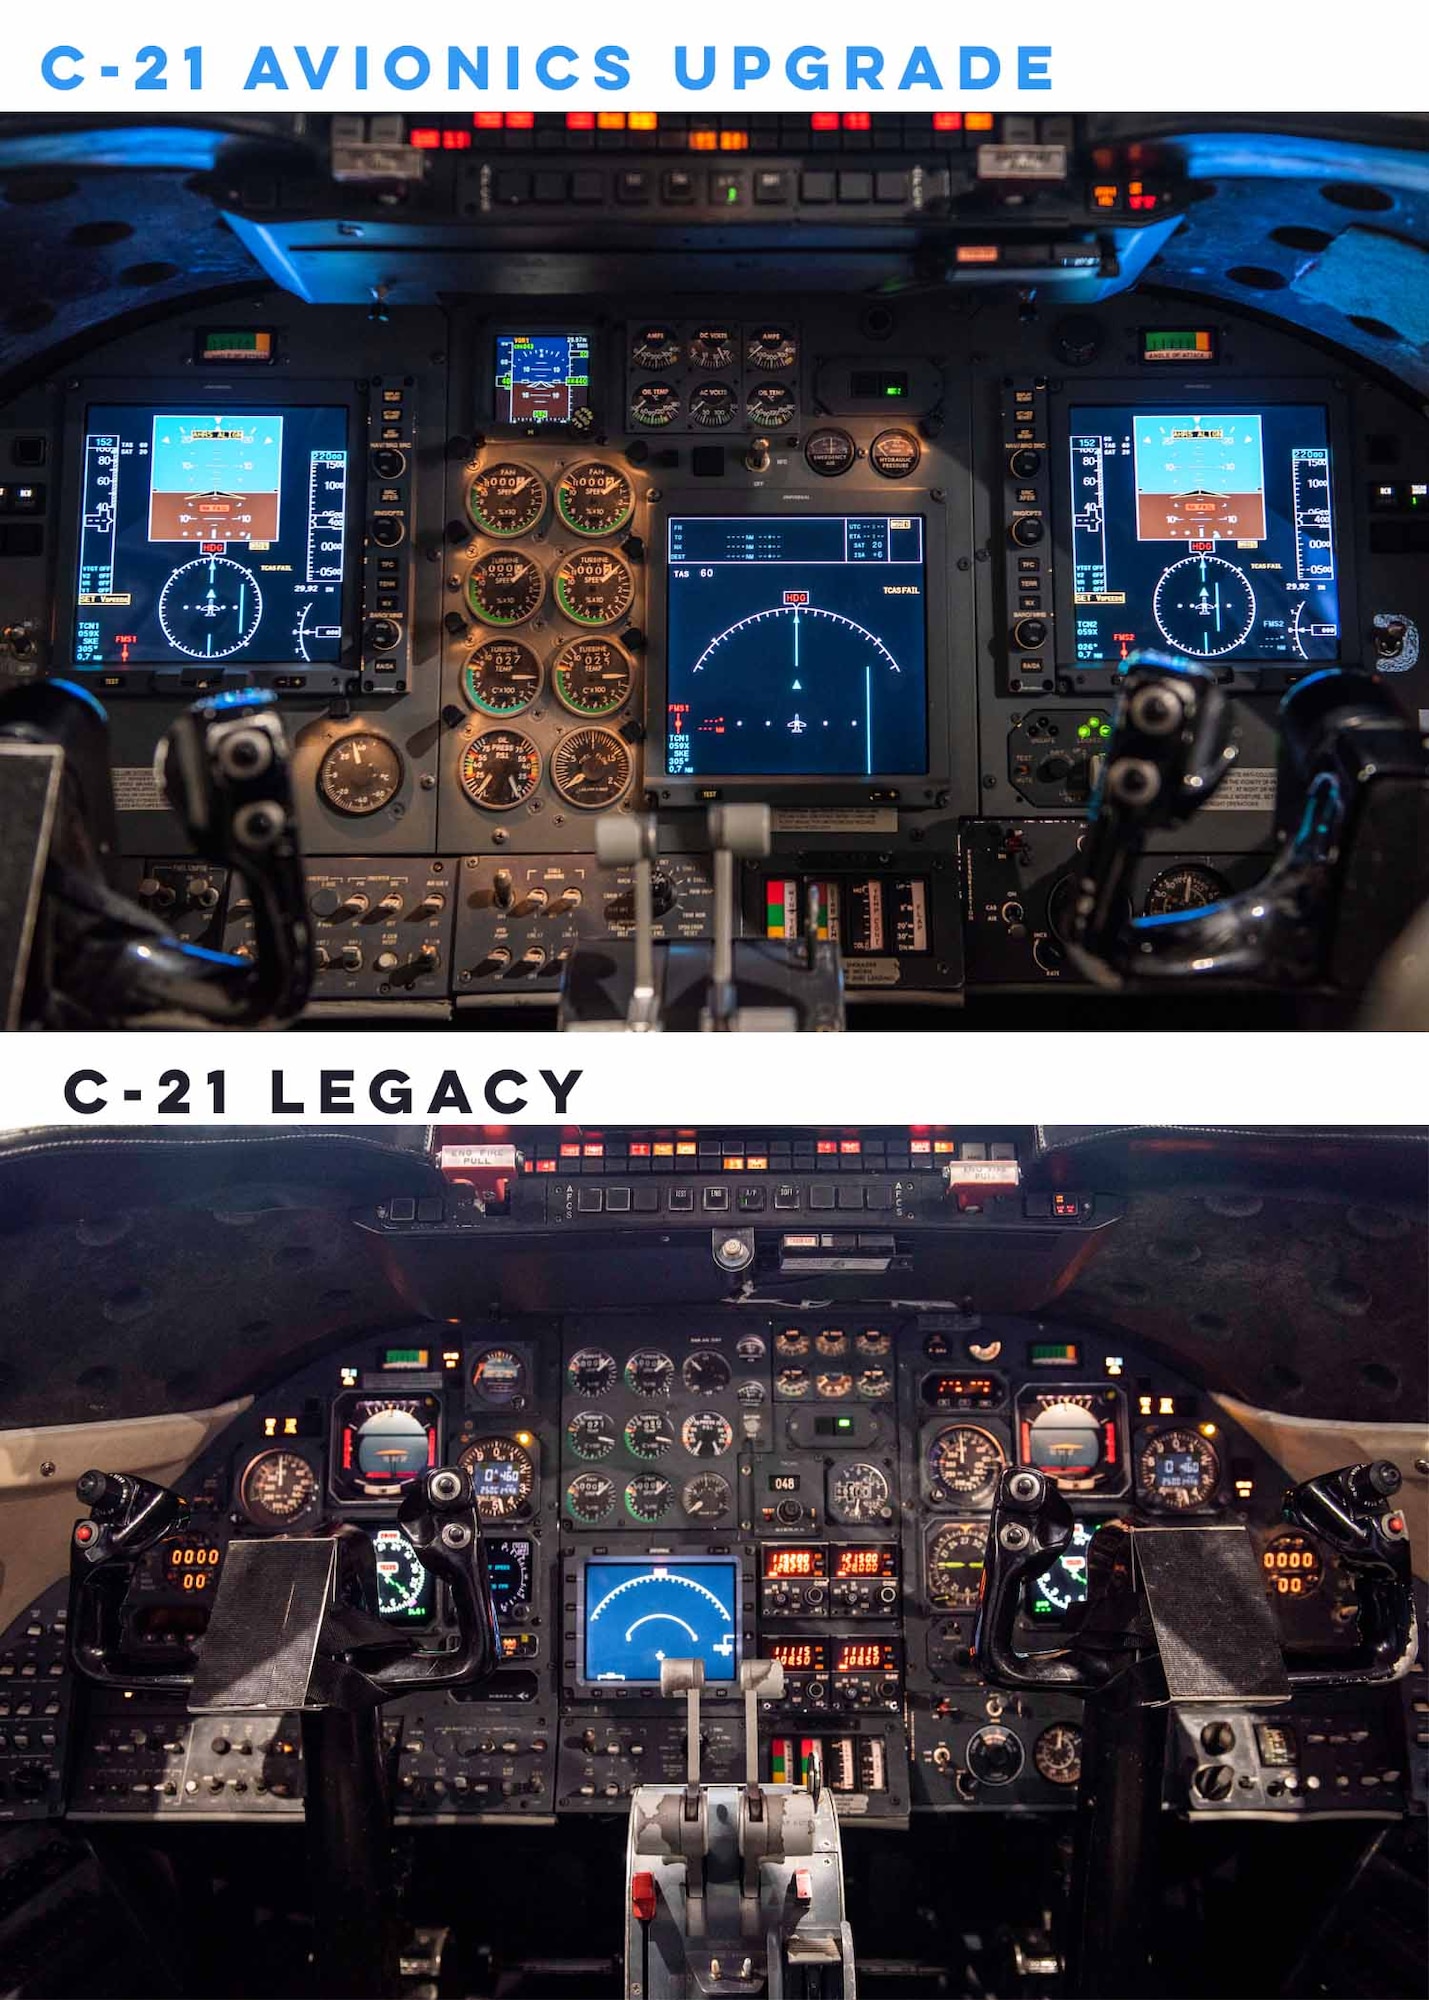 The C-21 aircraft has undergone a $38 million avionics upgrade to comply with the Federal Aviation Administration’s mandate to keep congested airspace safe. The upgrades include new communication equipment which enables aircrew and air traffic control to better relay real-time aircraft parameters.